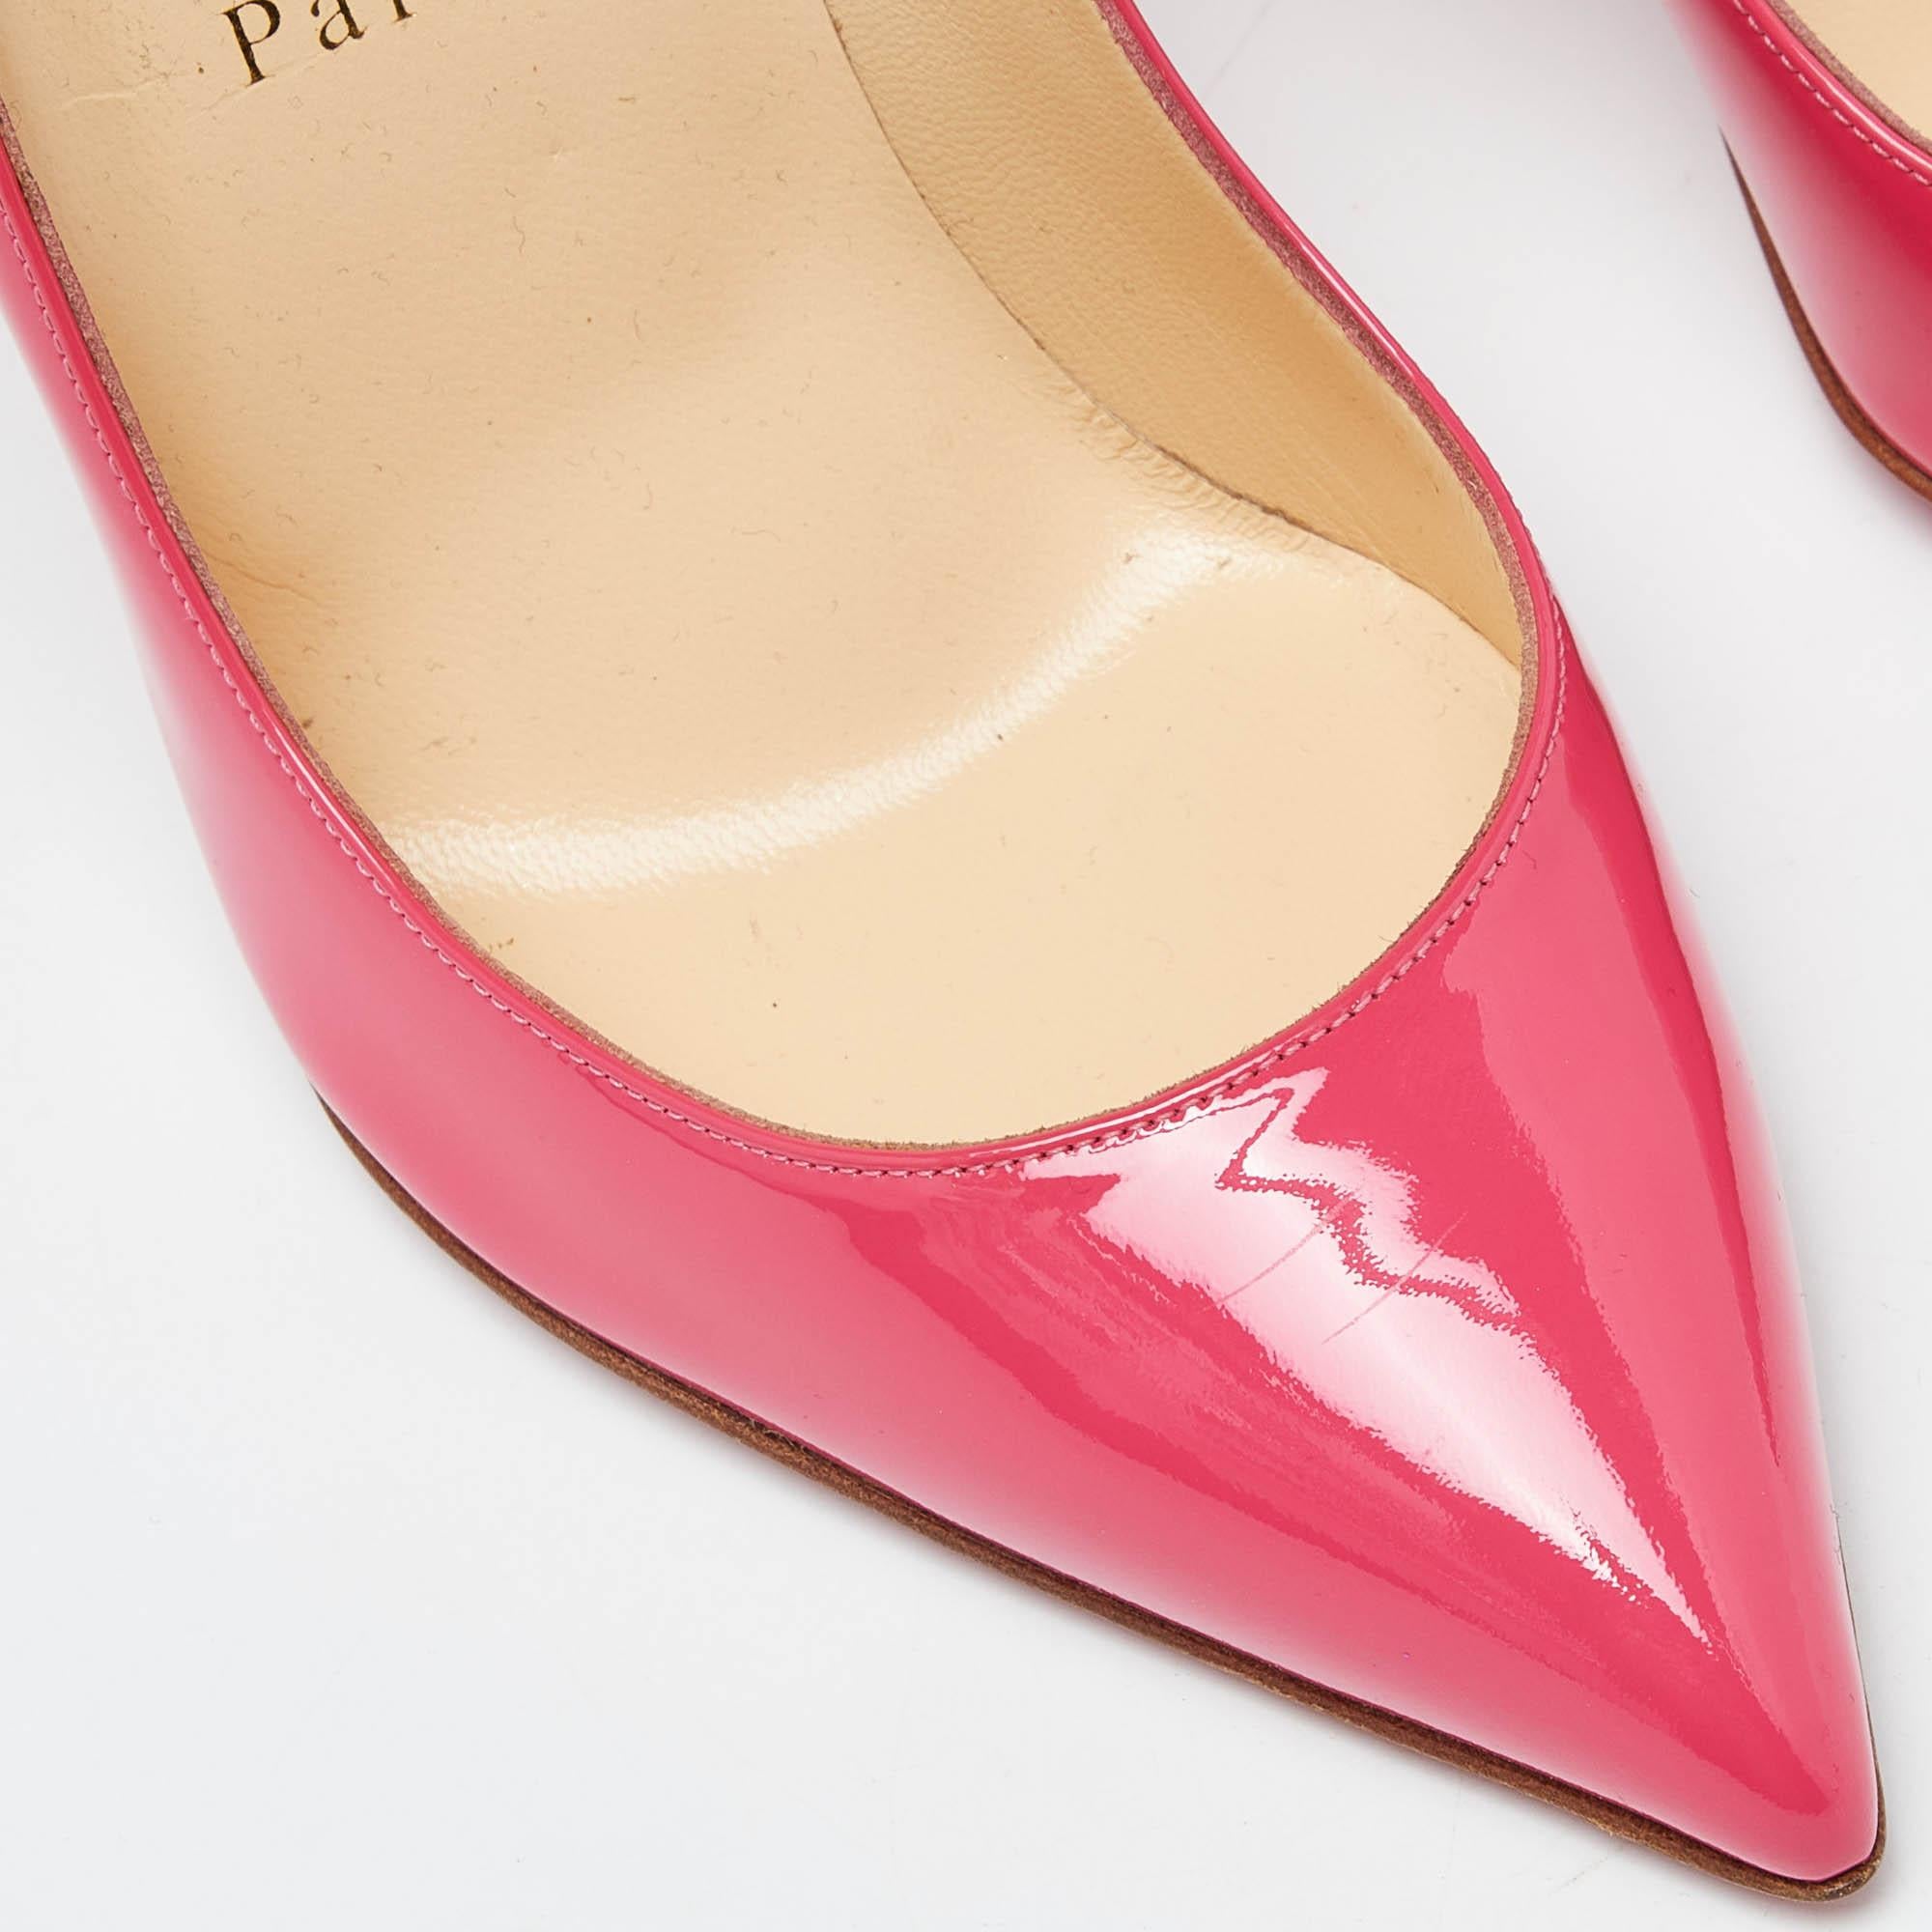 Christian Louboutin Pink Patent Leather Pigalle Pumps Size 38 For Sale 2